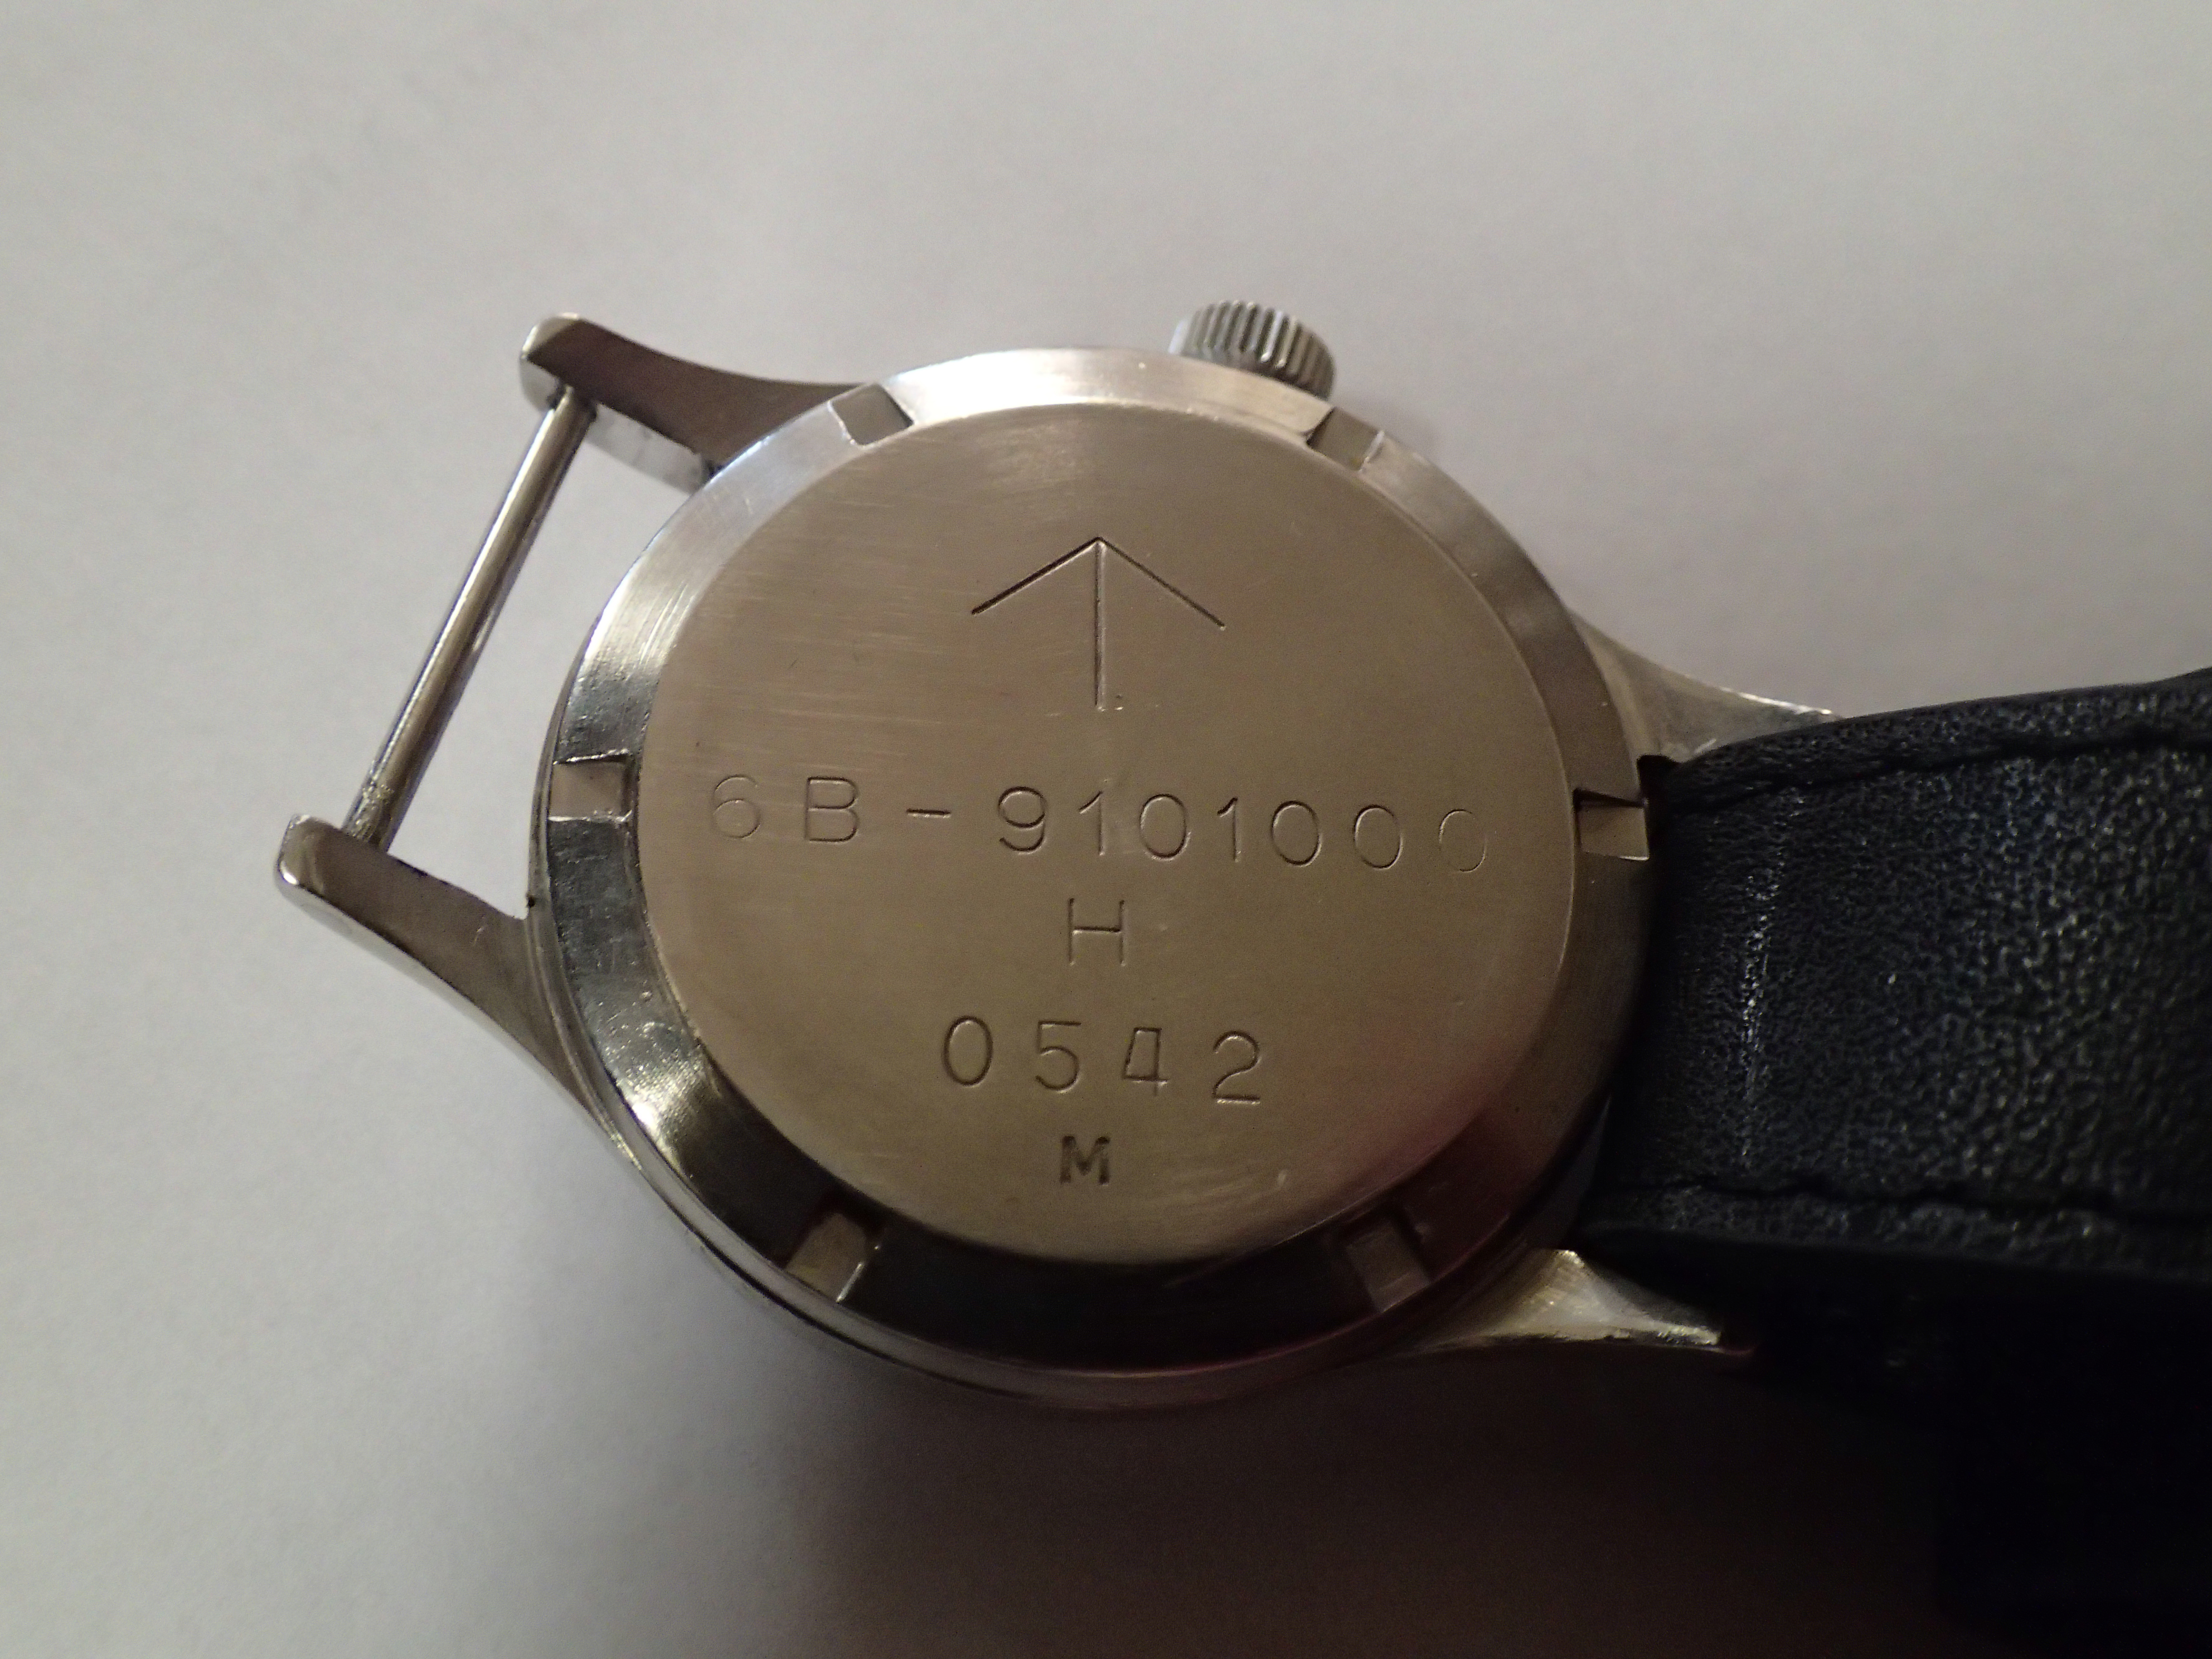 Vintage 1960s Hamilton Military Pilot wristwatch with crows foot and 6B-9101000 H0542 M verso Kept - Image 2 of 2